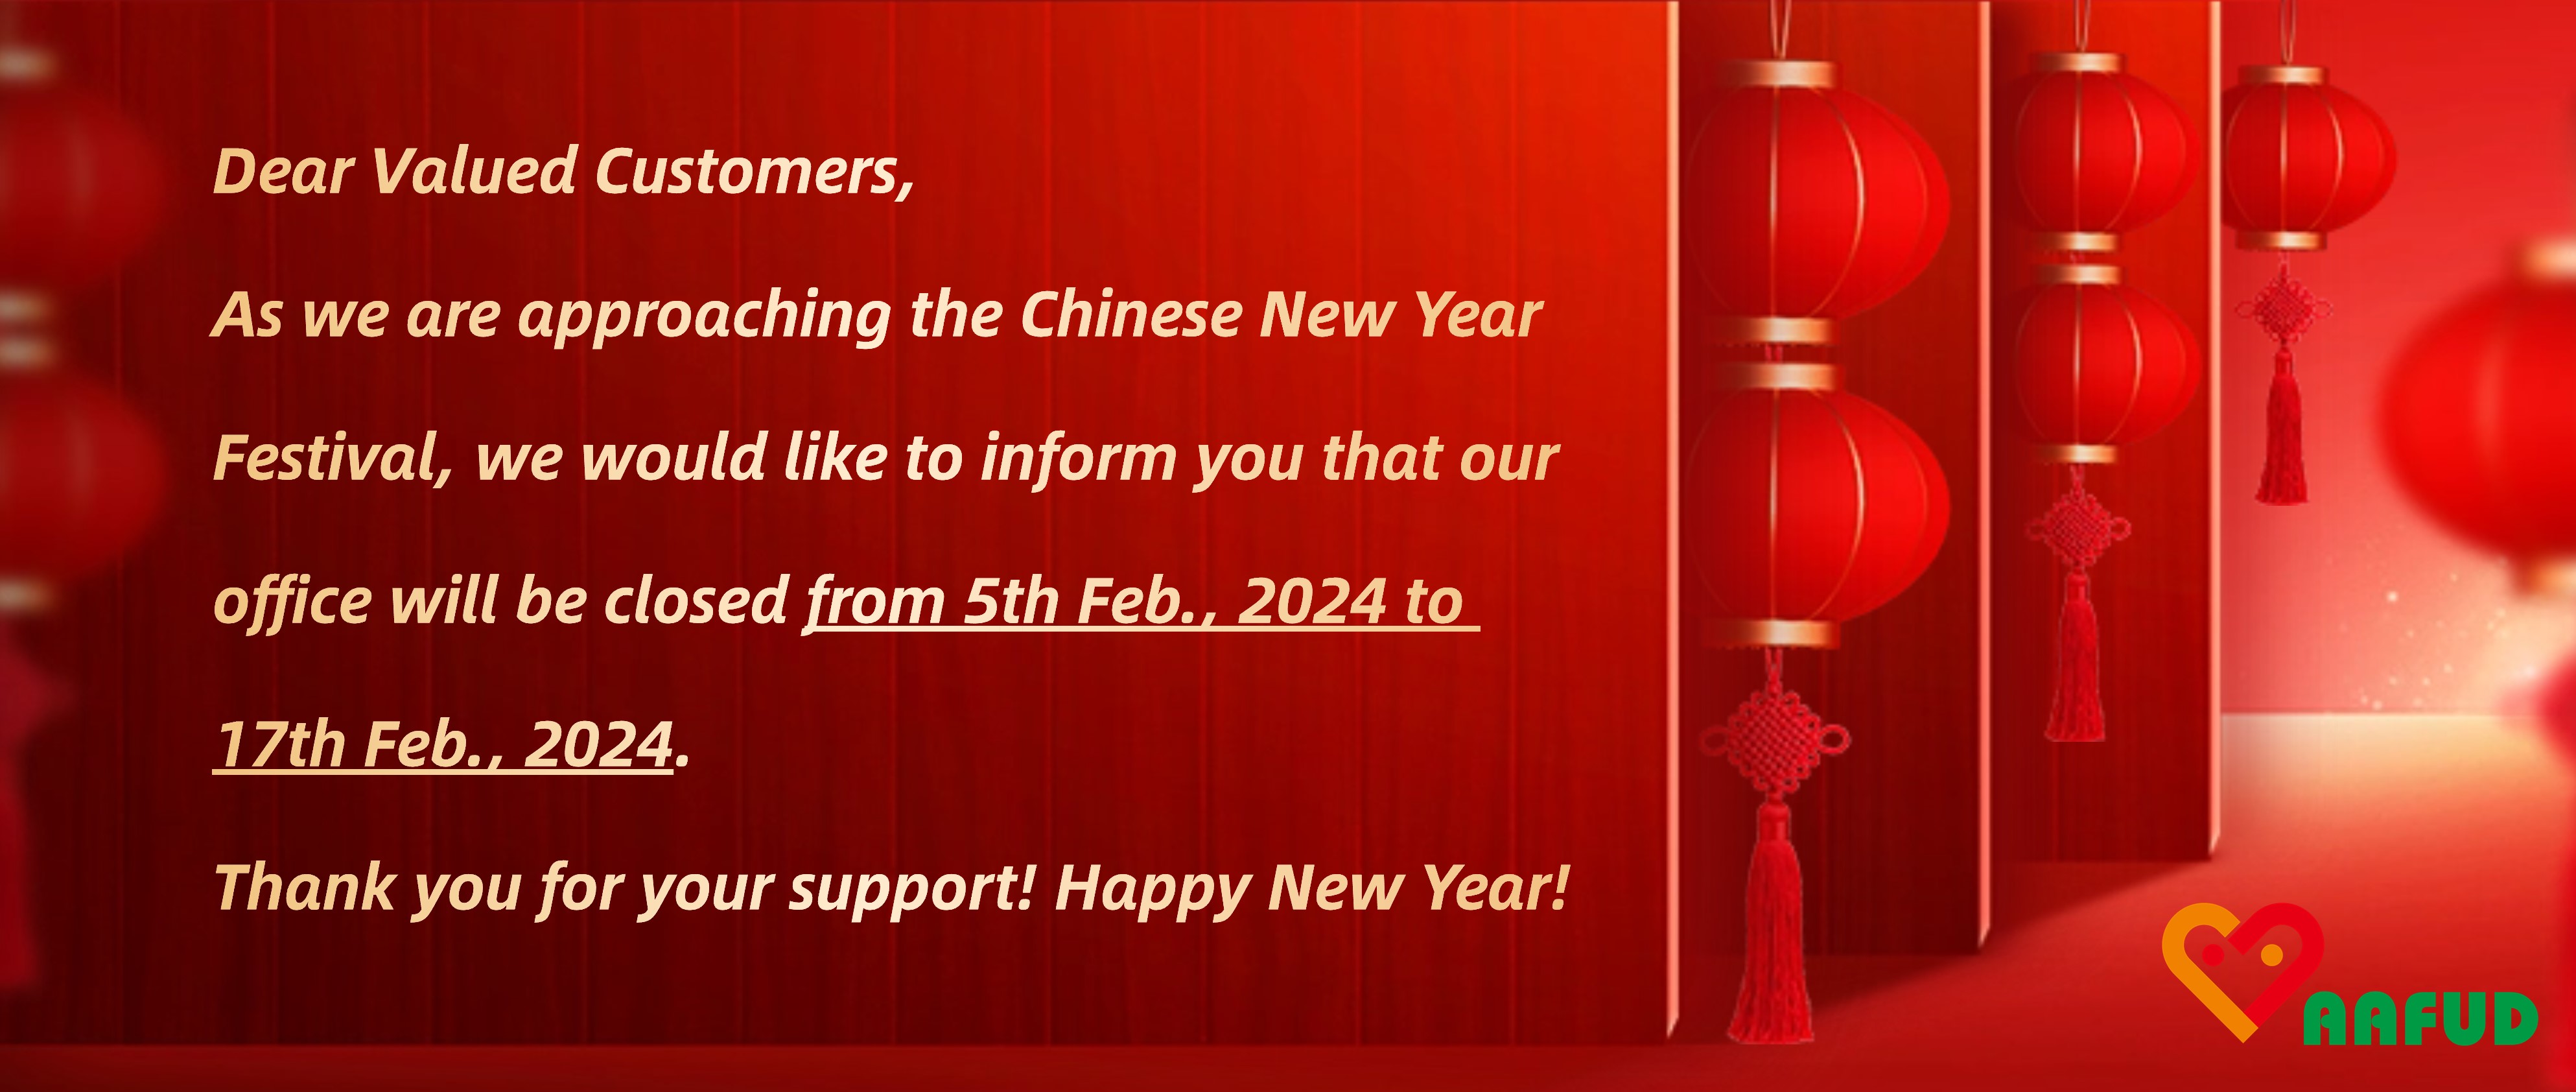 Holiday Notice of Chinese New Year Festival